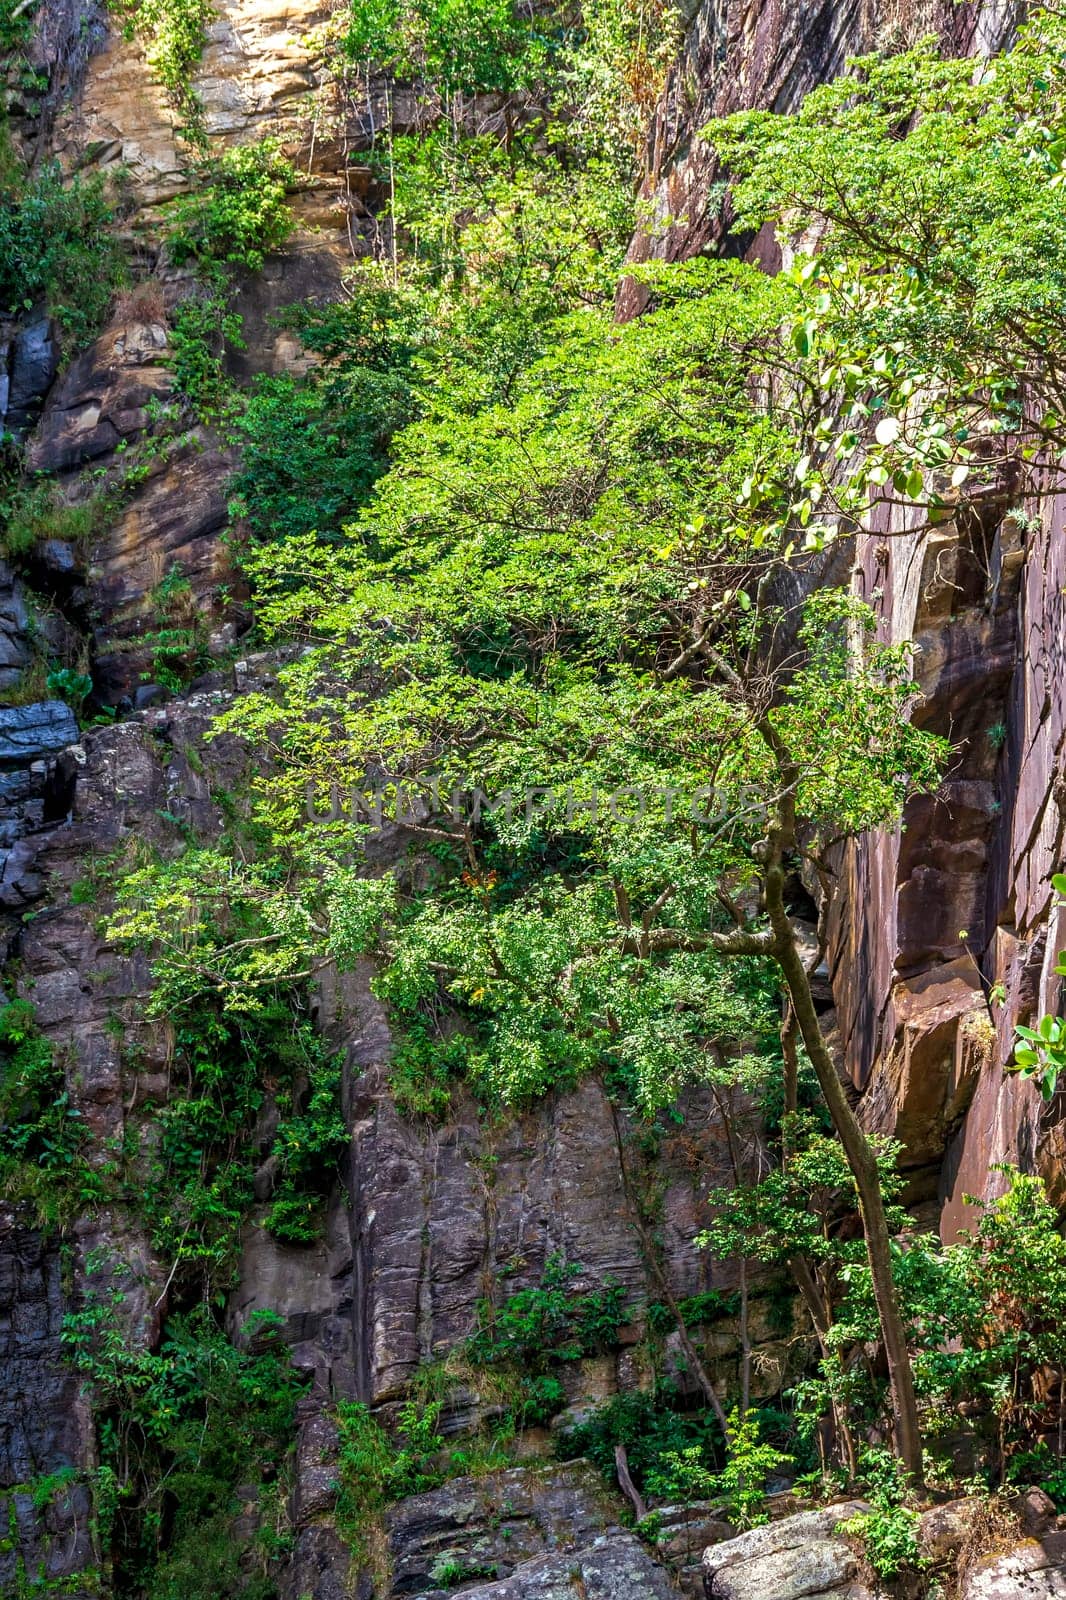 Forest vegetation blending with the rocks by Fred_Pinheiro